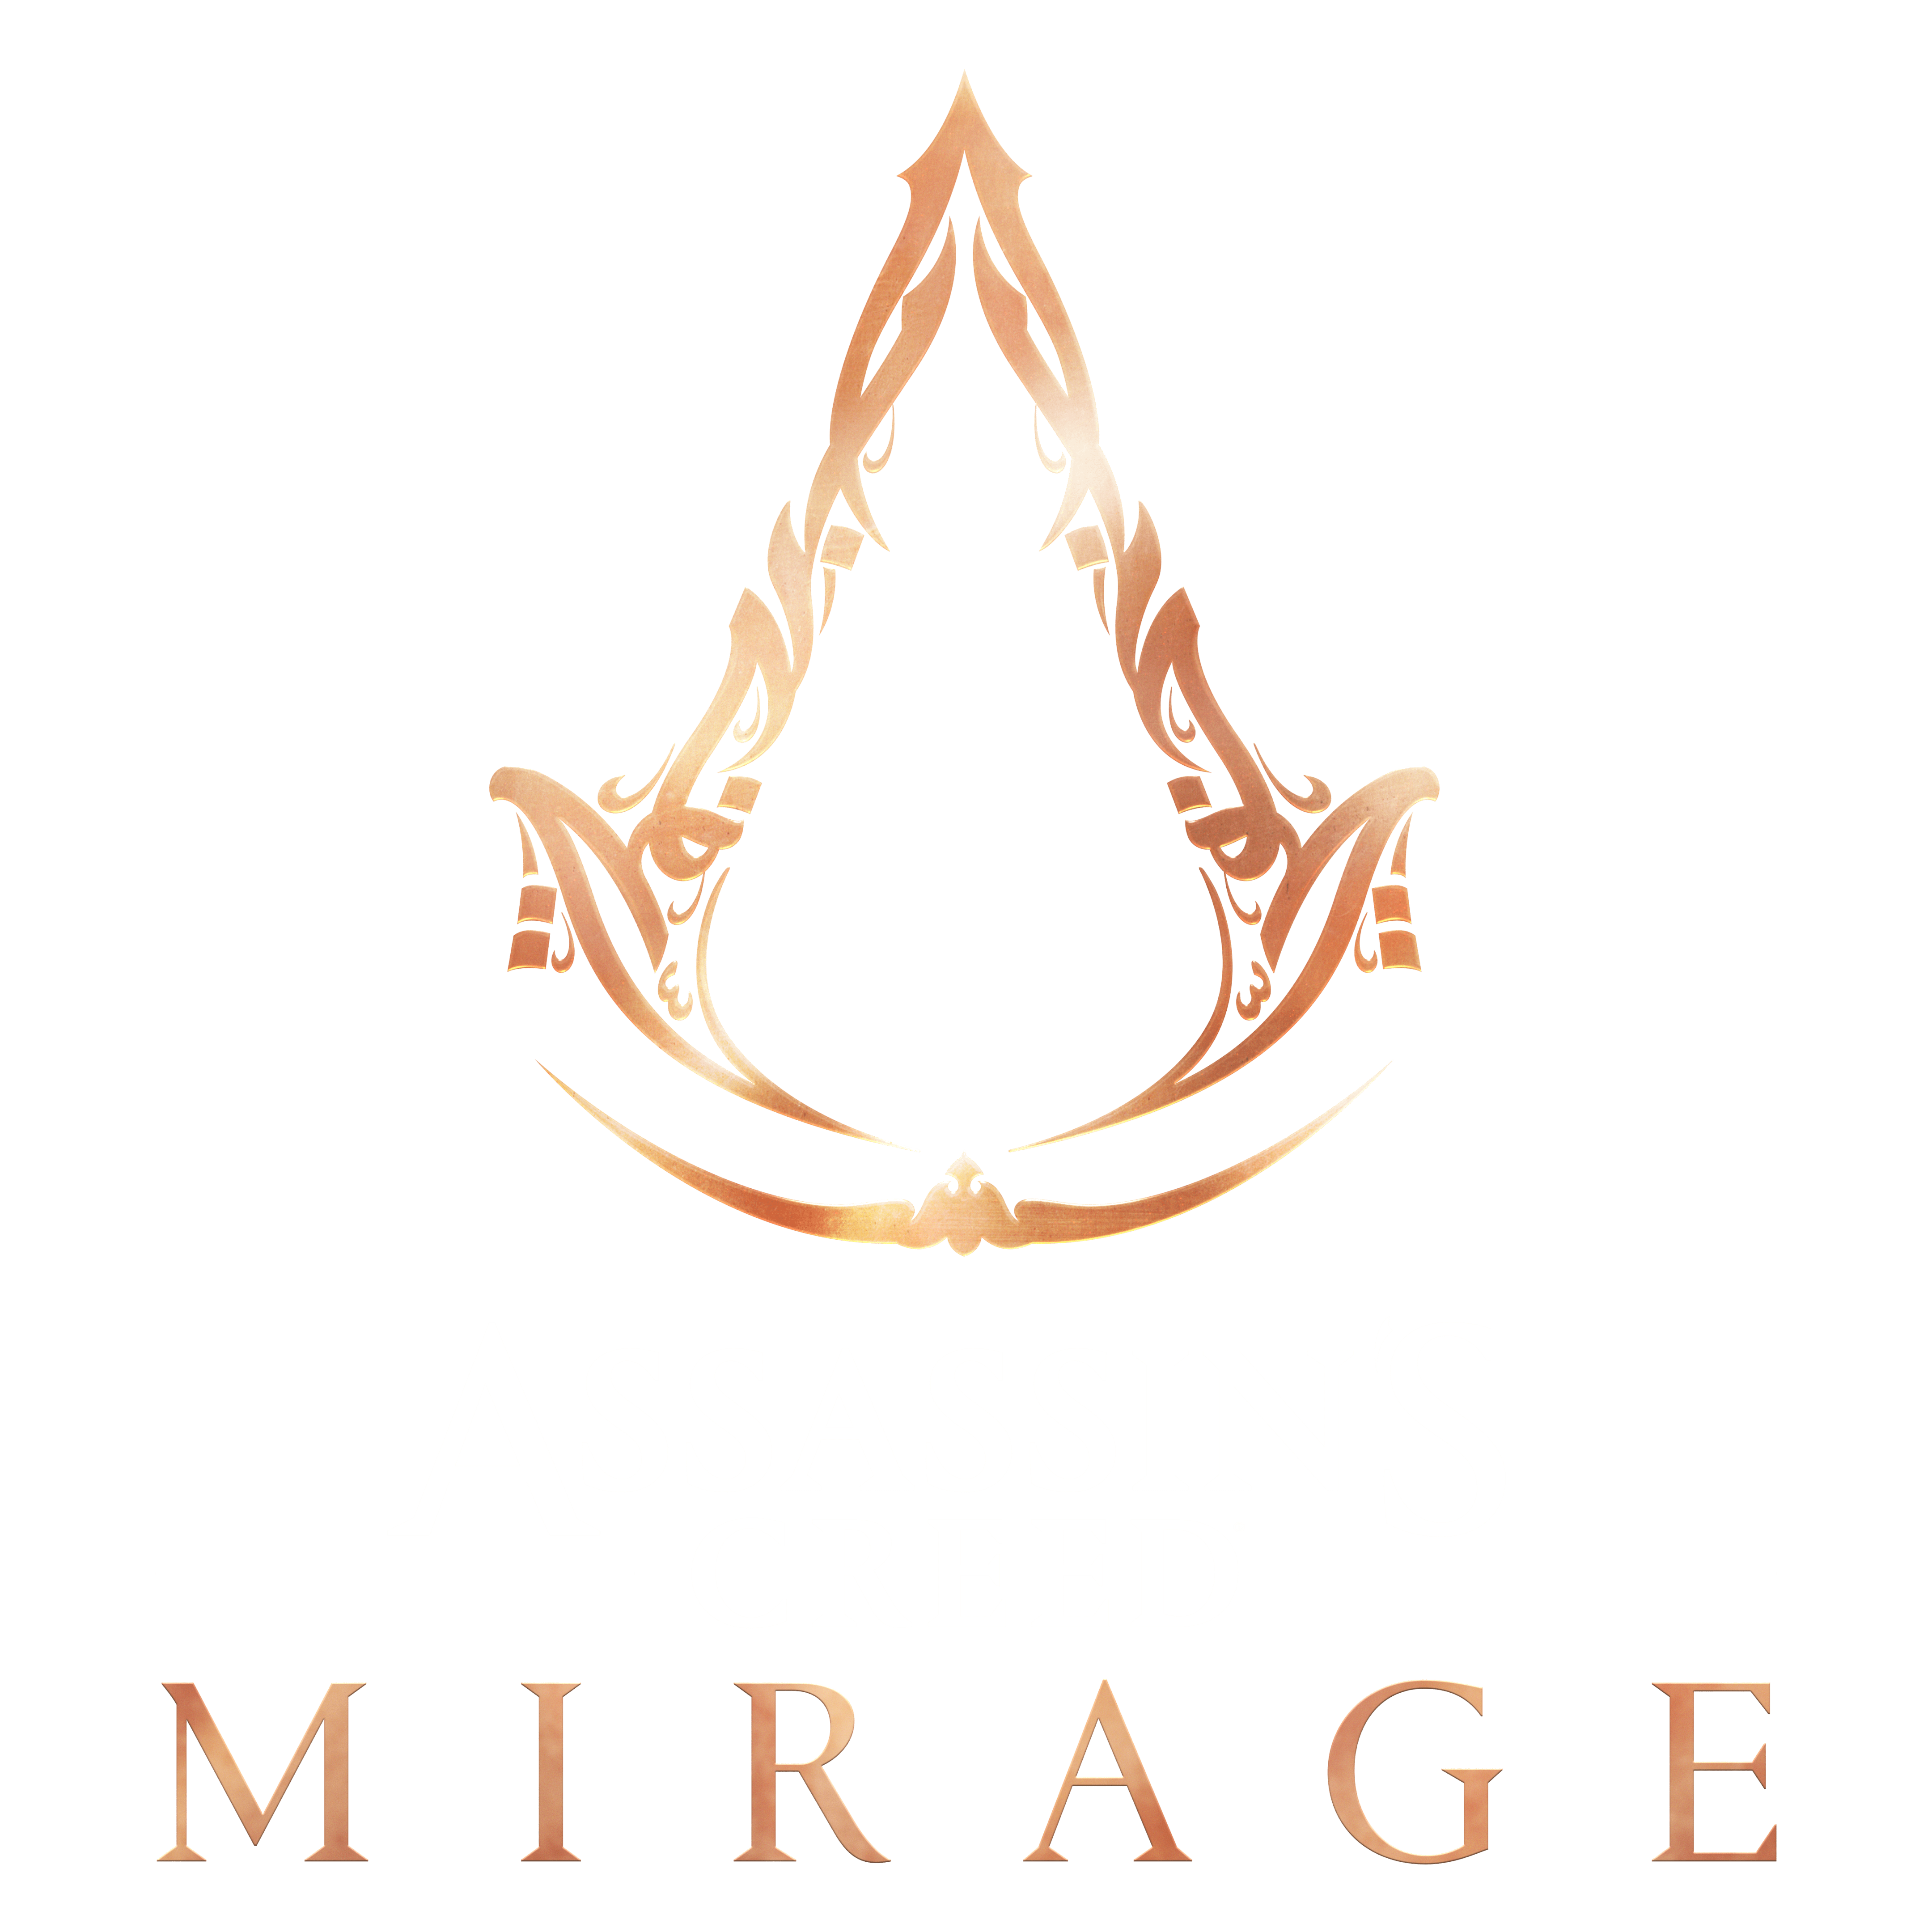 Assassin's Creed Mirage Reportedly Aiming For August 2023 Launch On Xbox